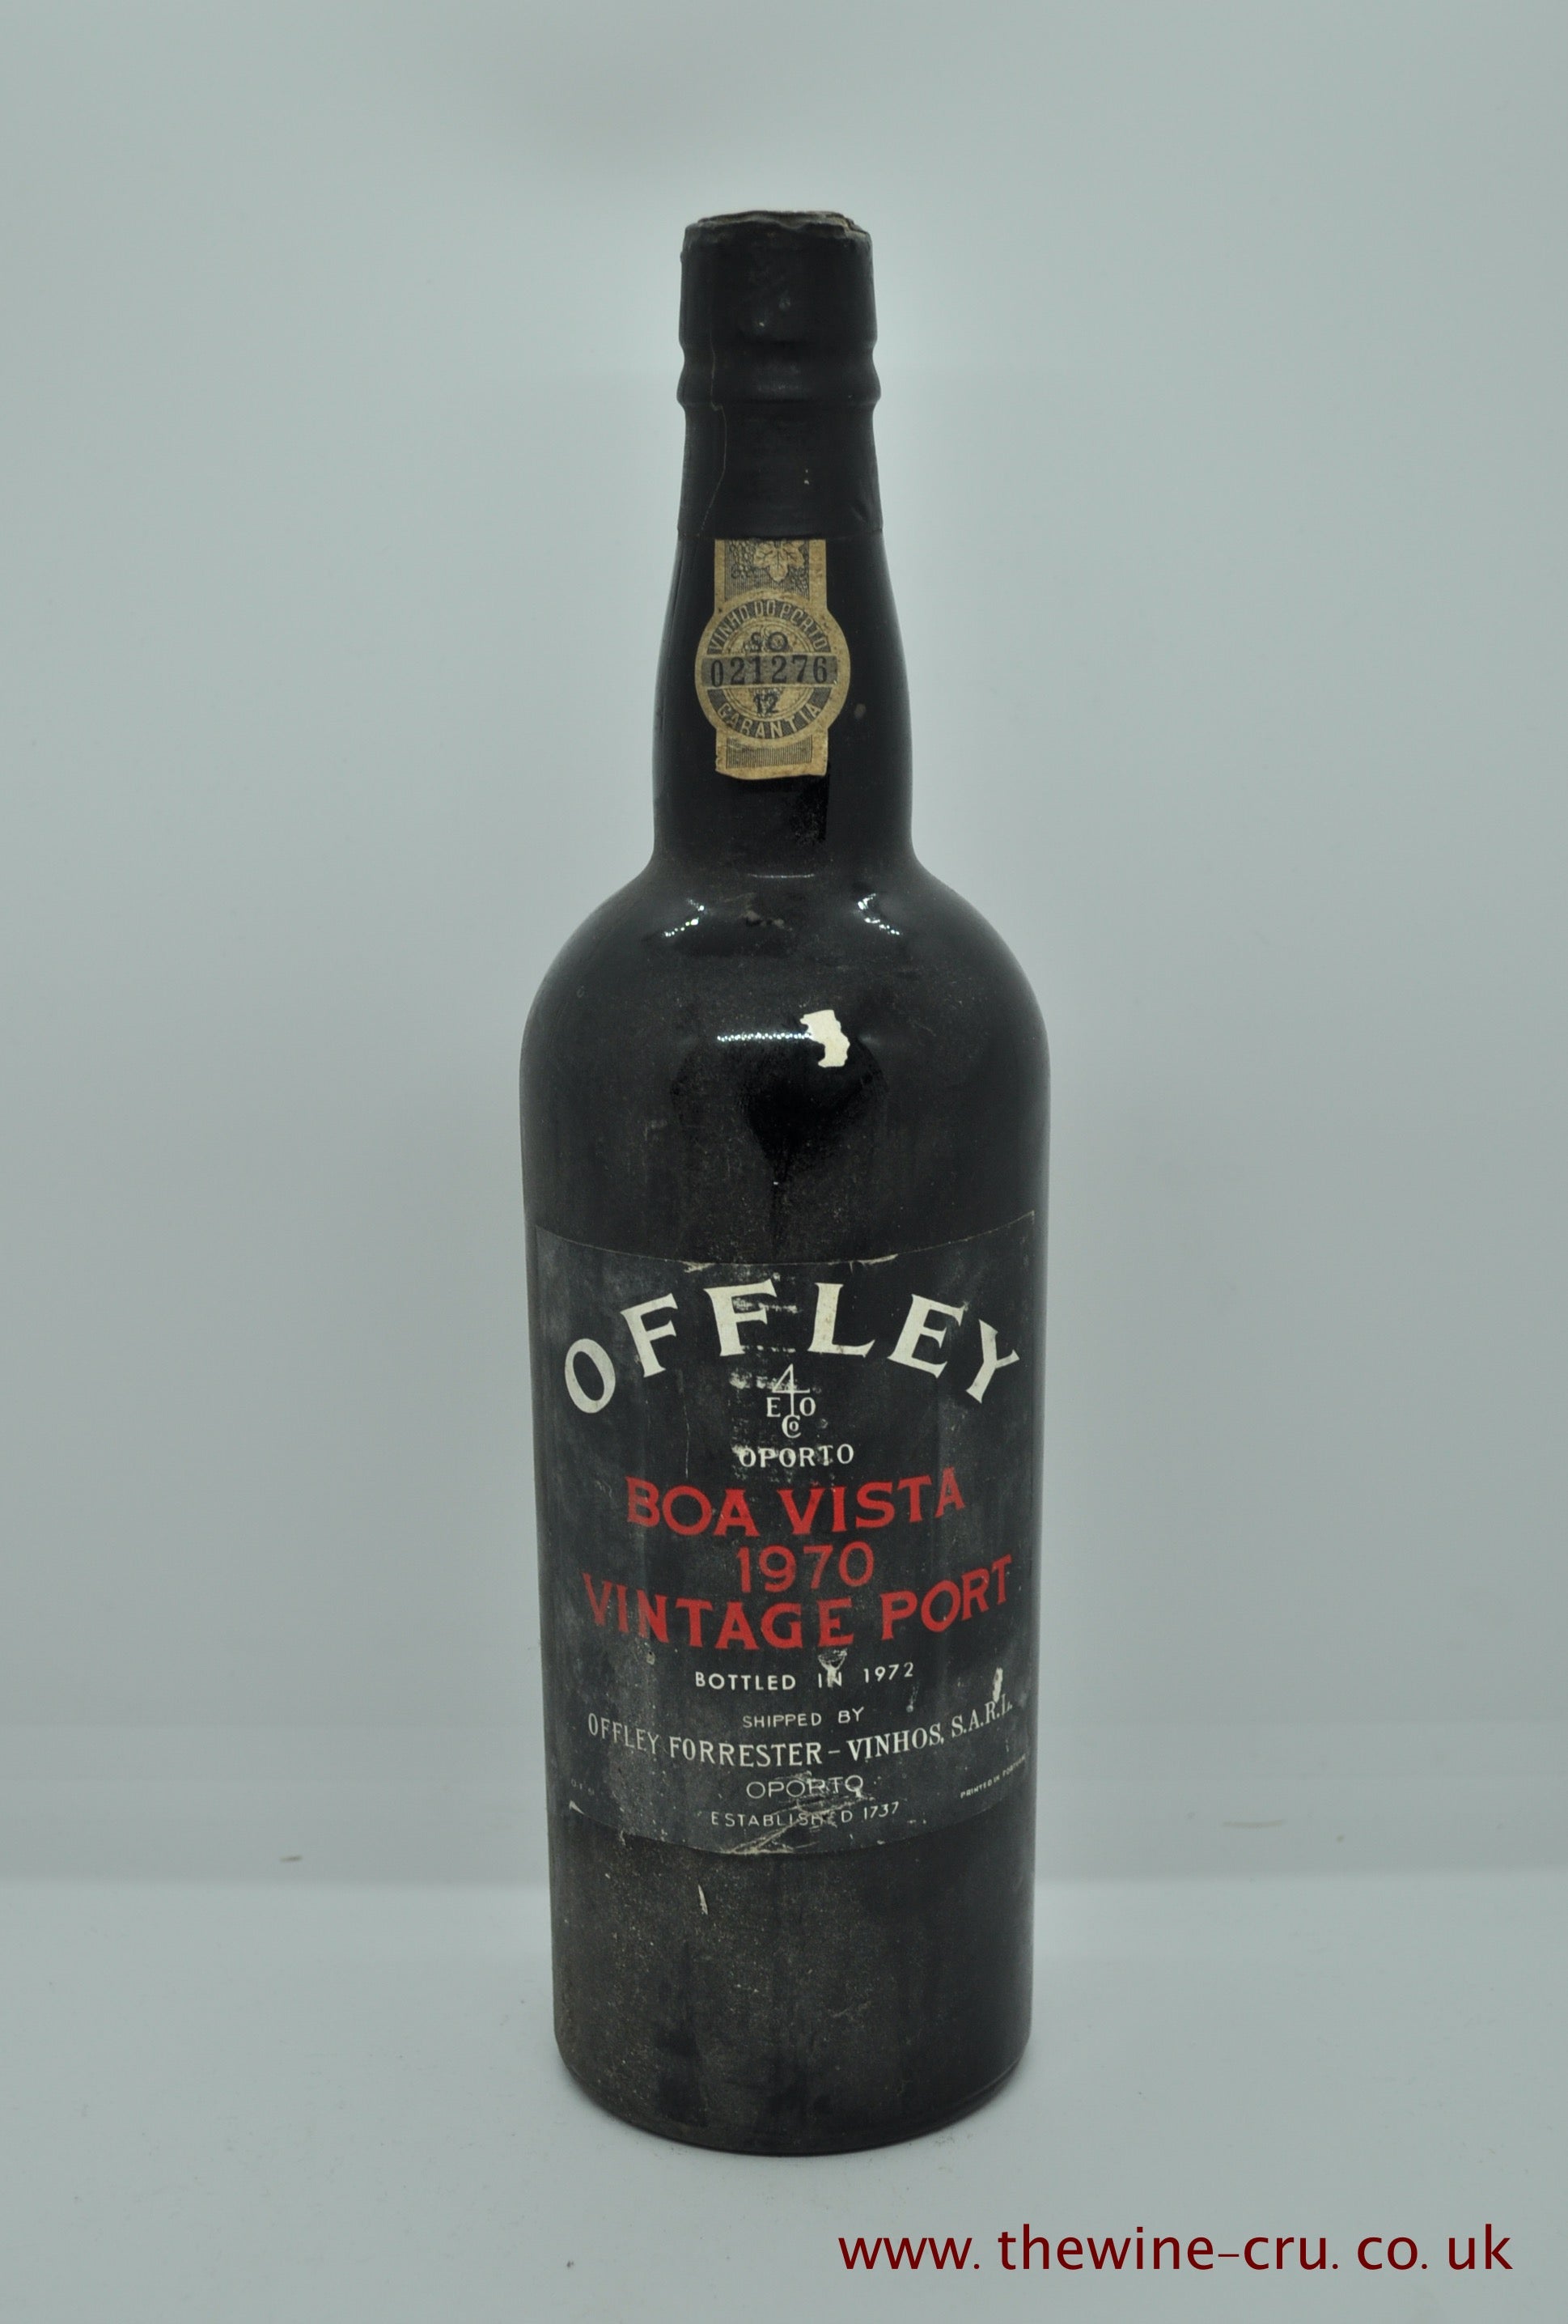 1970 vintage port wine. Offley Boa Vista Vintage Port. Portugal. The bottle is in good condition, Immediate delivery. Free local delivery. Gift wrapping available.